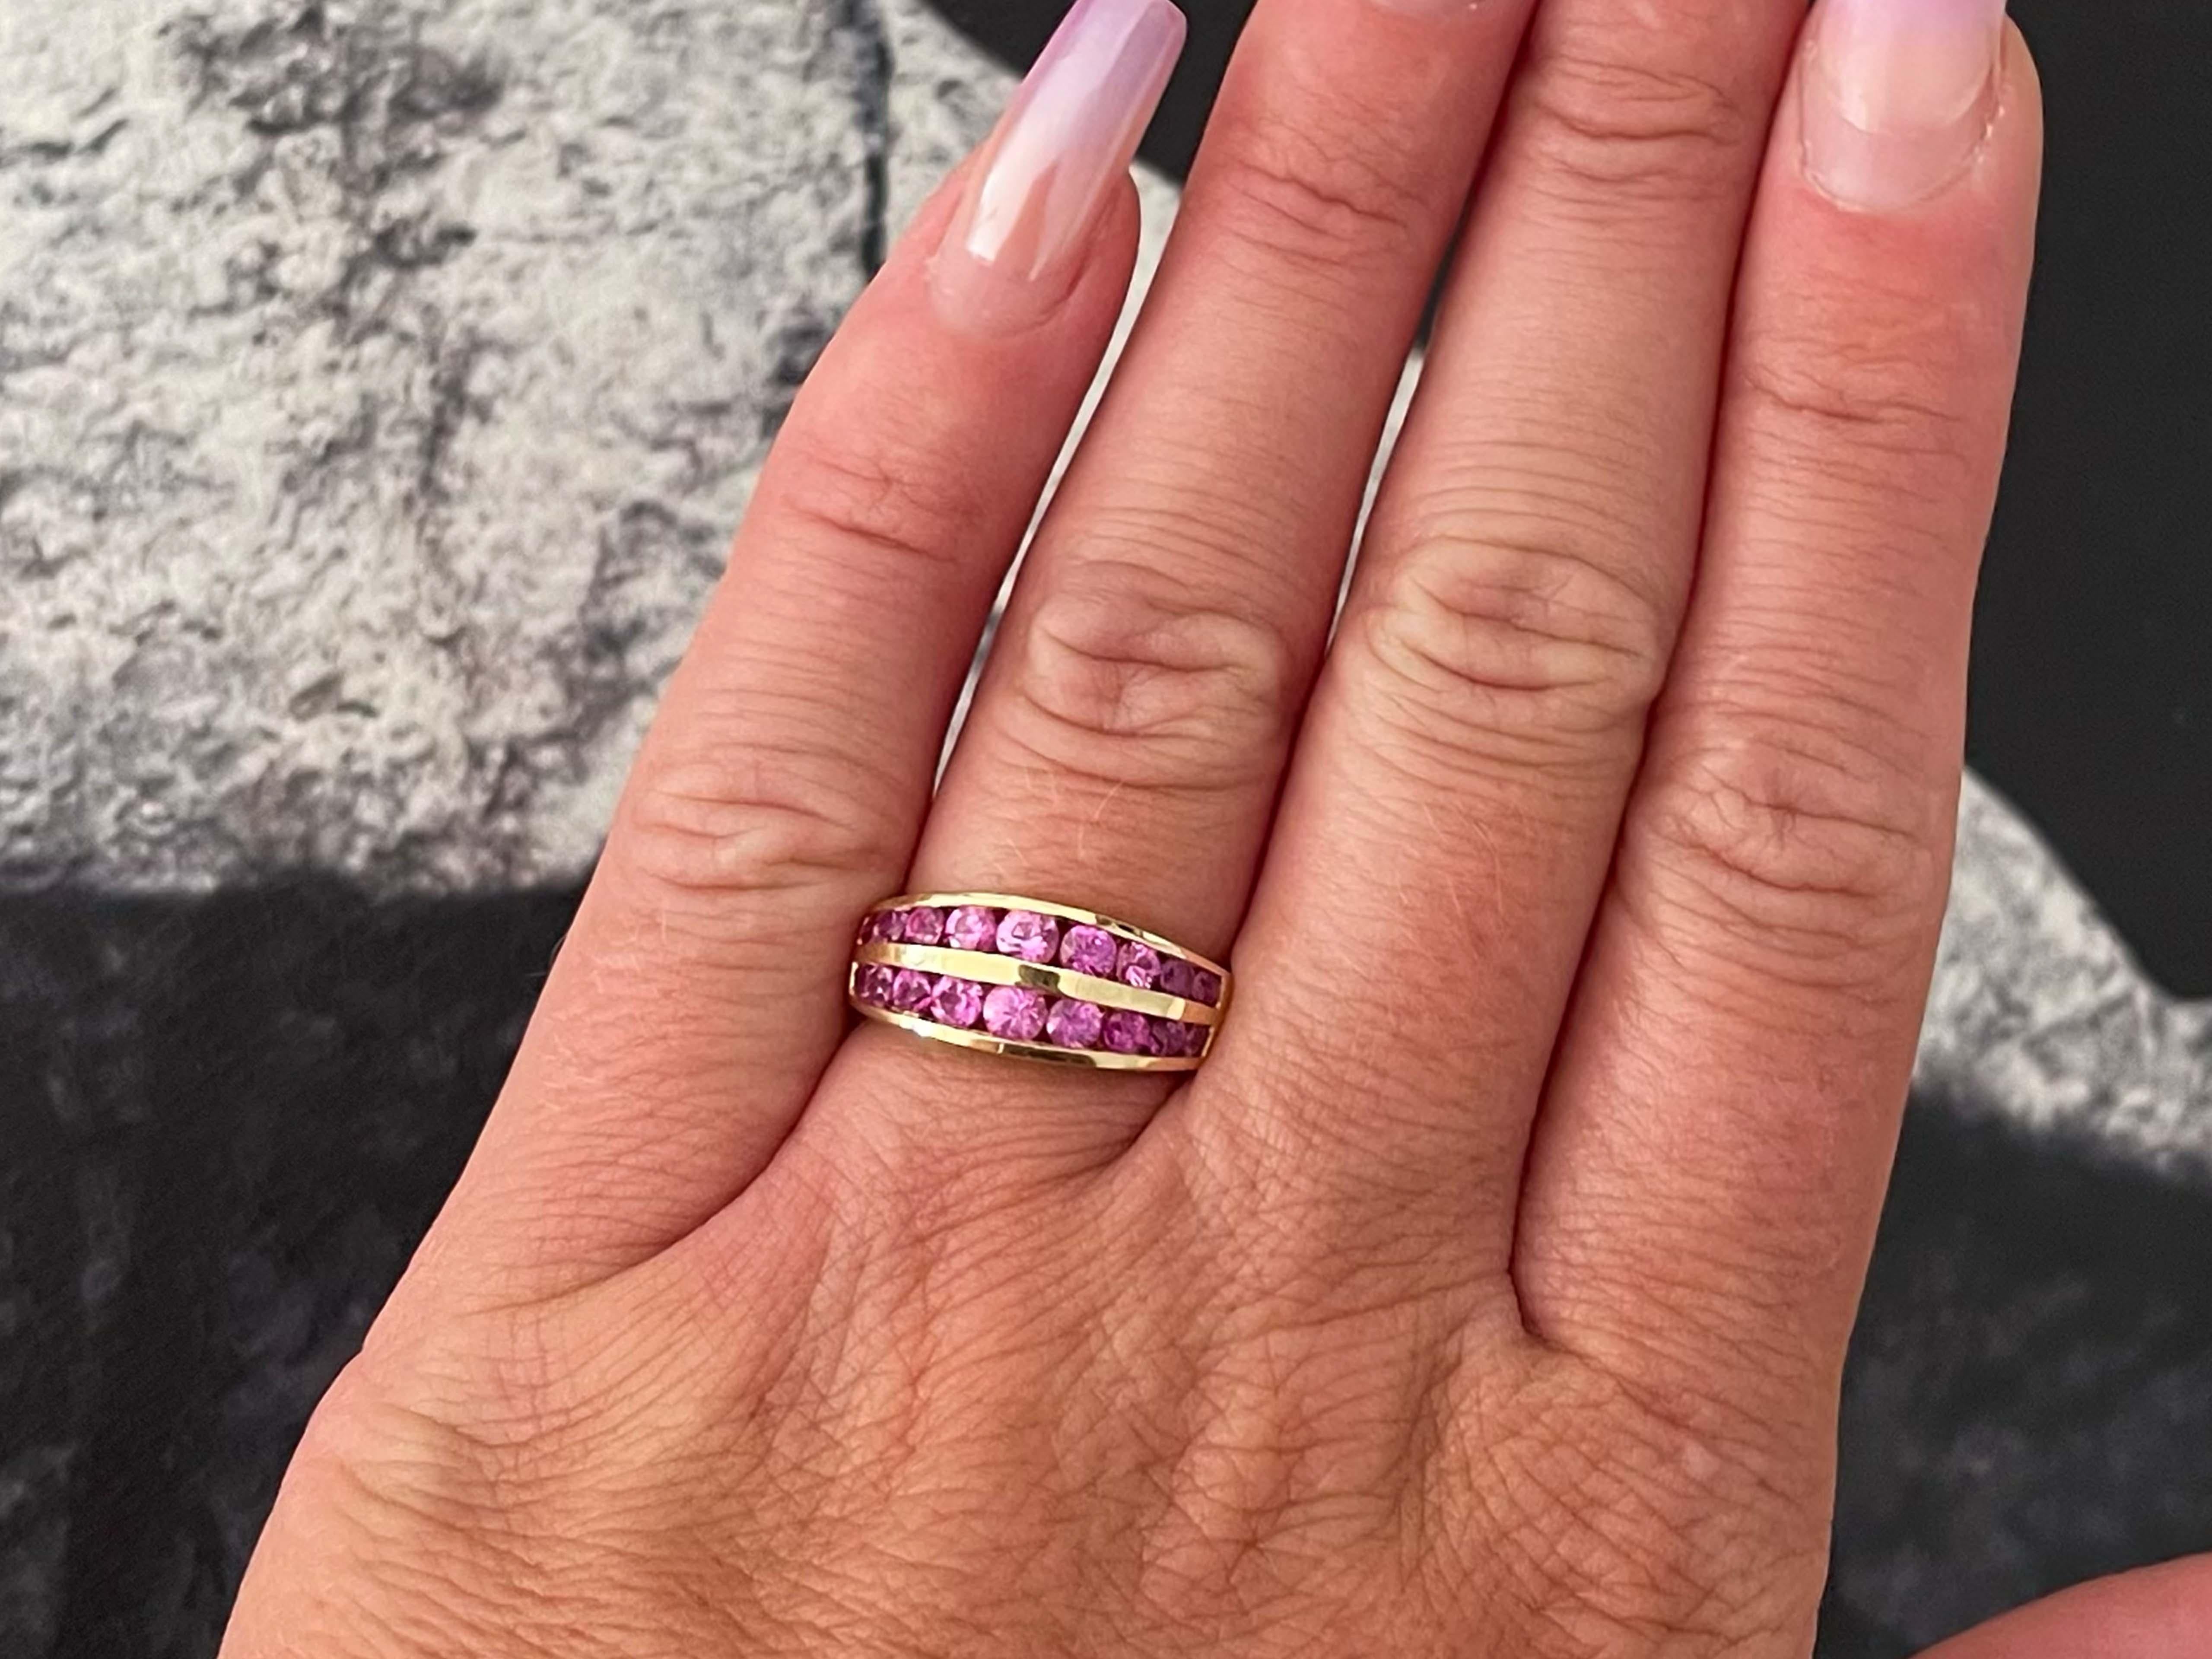 Item Specifications:

Metal: 14K Yellow Gold

Ring Size: 6.5

Total Weight: 3.9 Grams

Gemstone Specifications:

Gemstones: 18 pink sapphires

Condition: Preowned, Excellent

Stamped: 